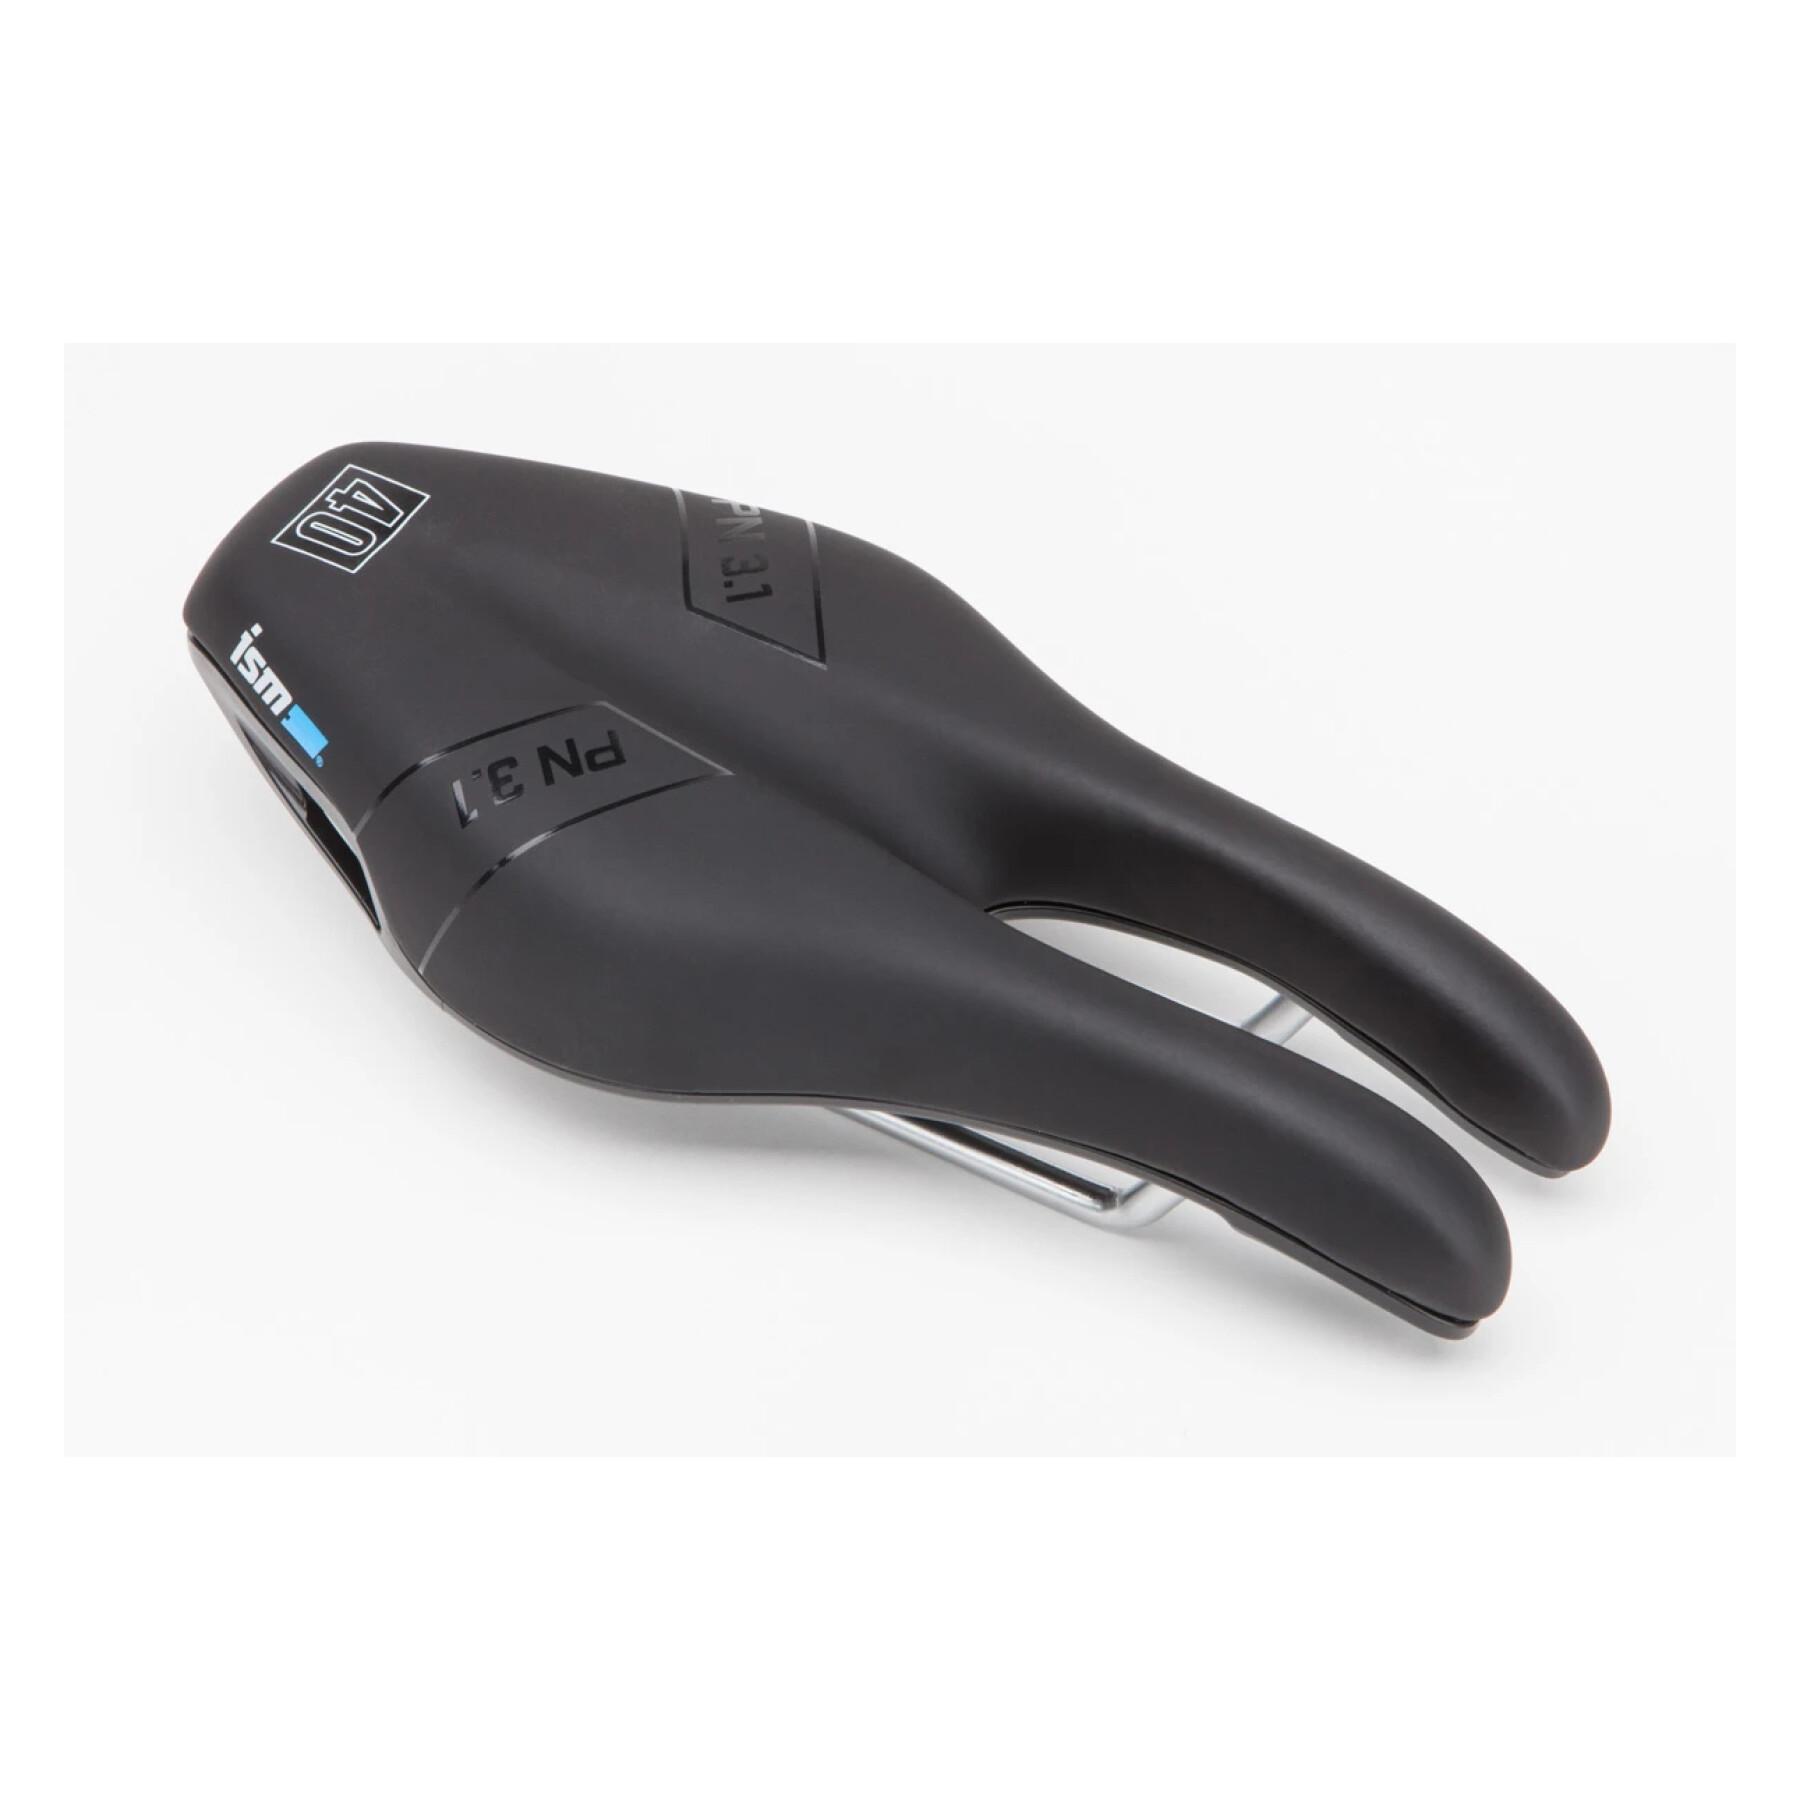 Selle ISM PN 3.0